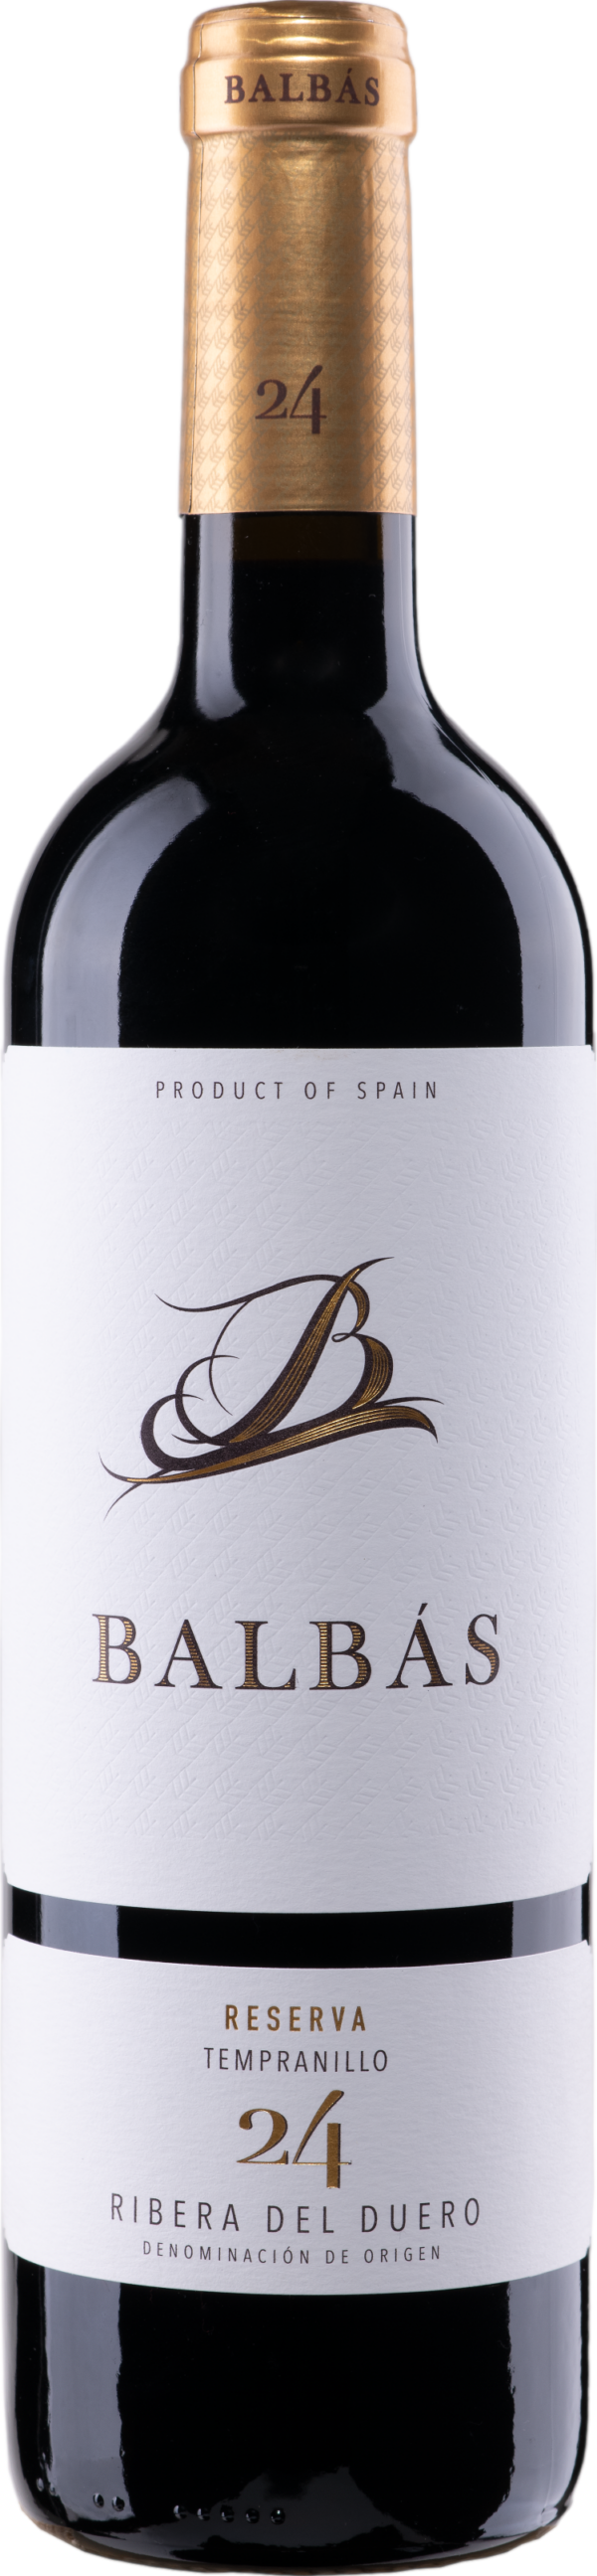 Product image of Balbas Reserva 2017 from 8wines